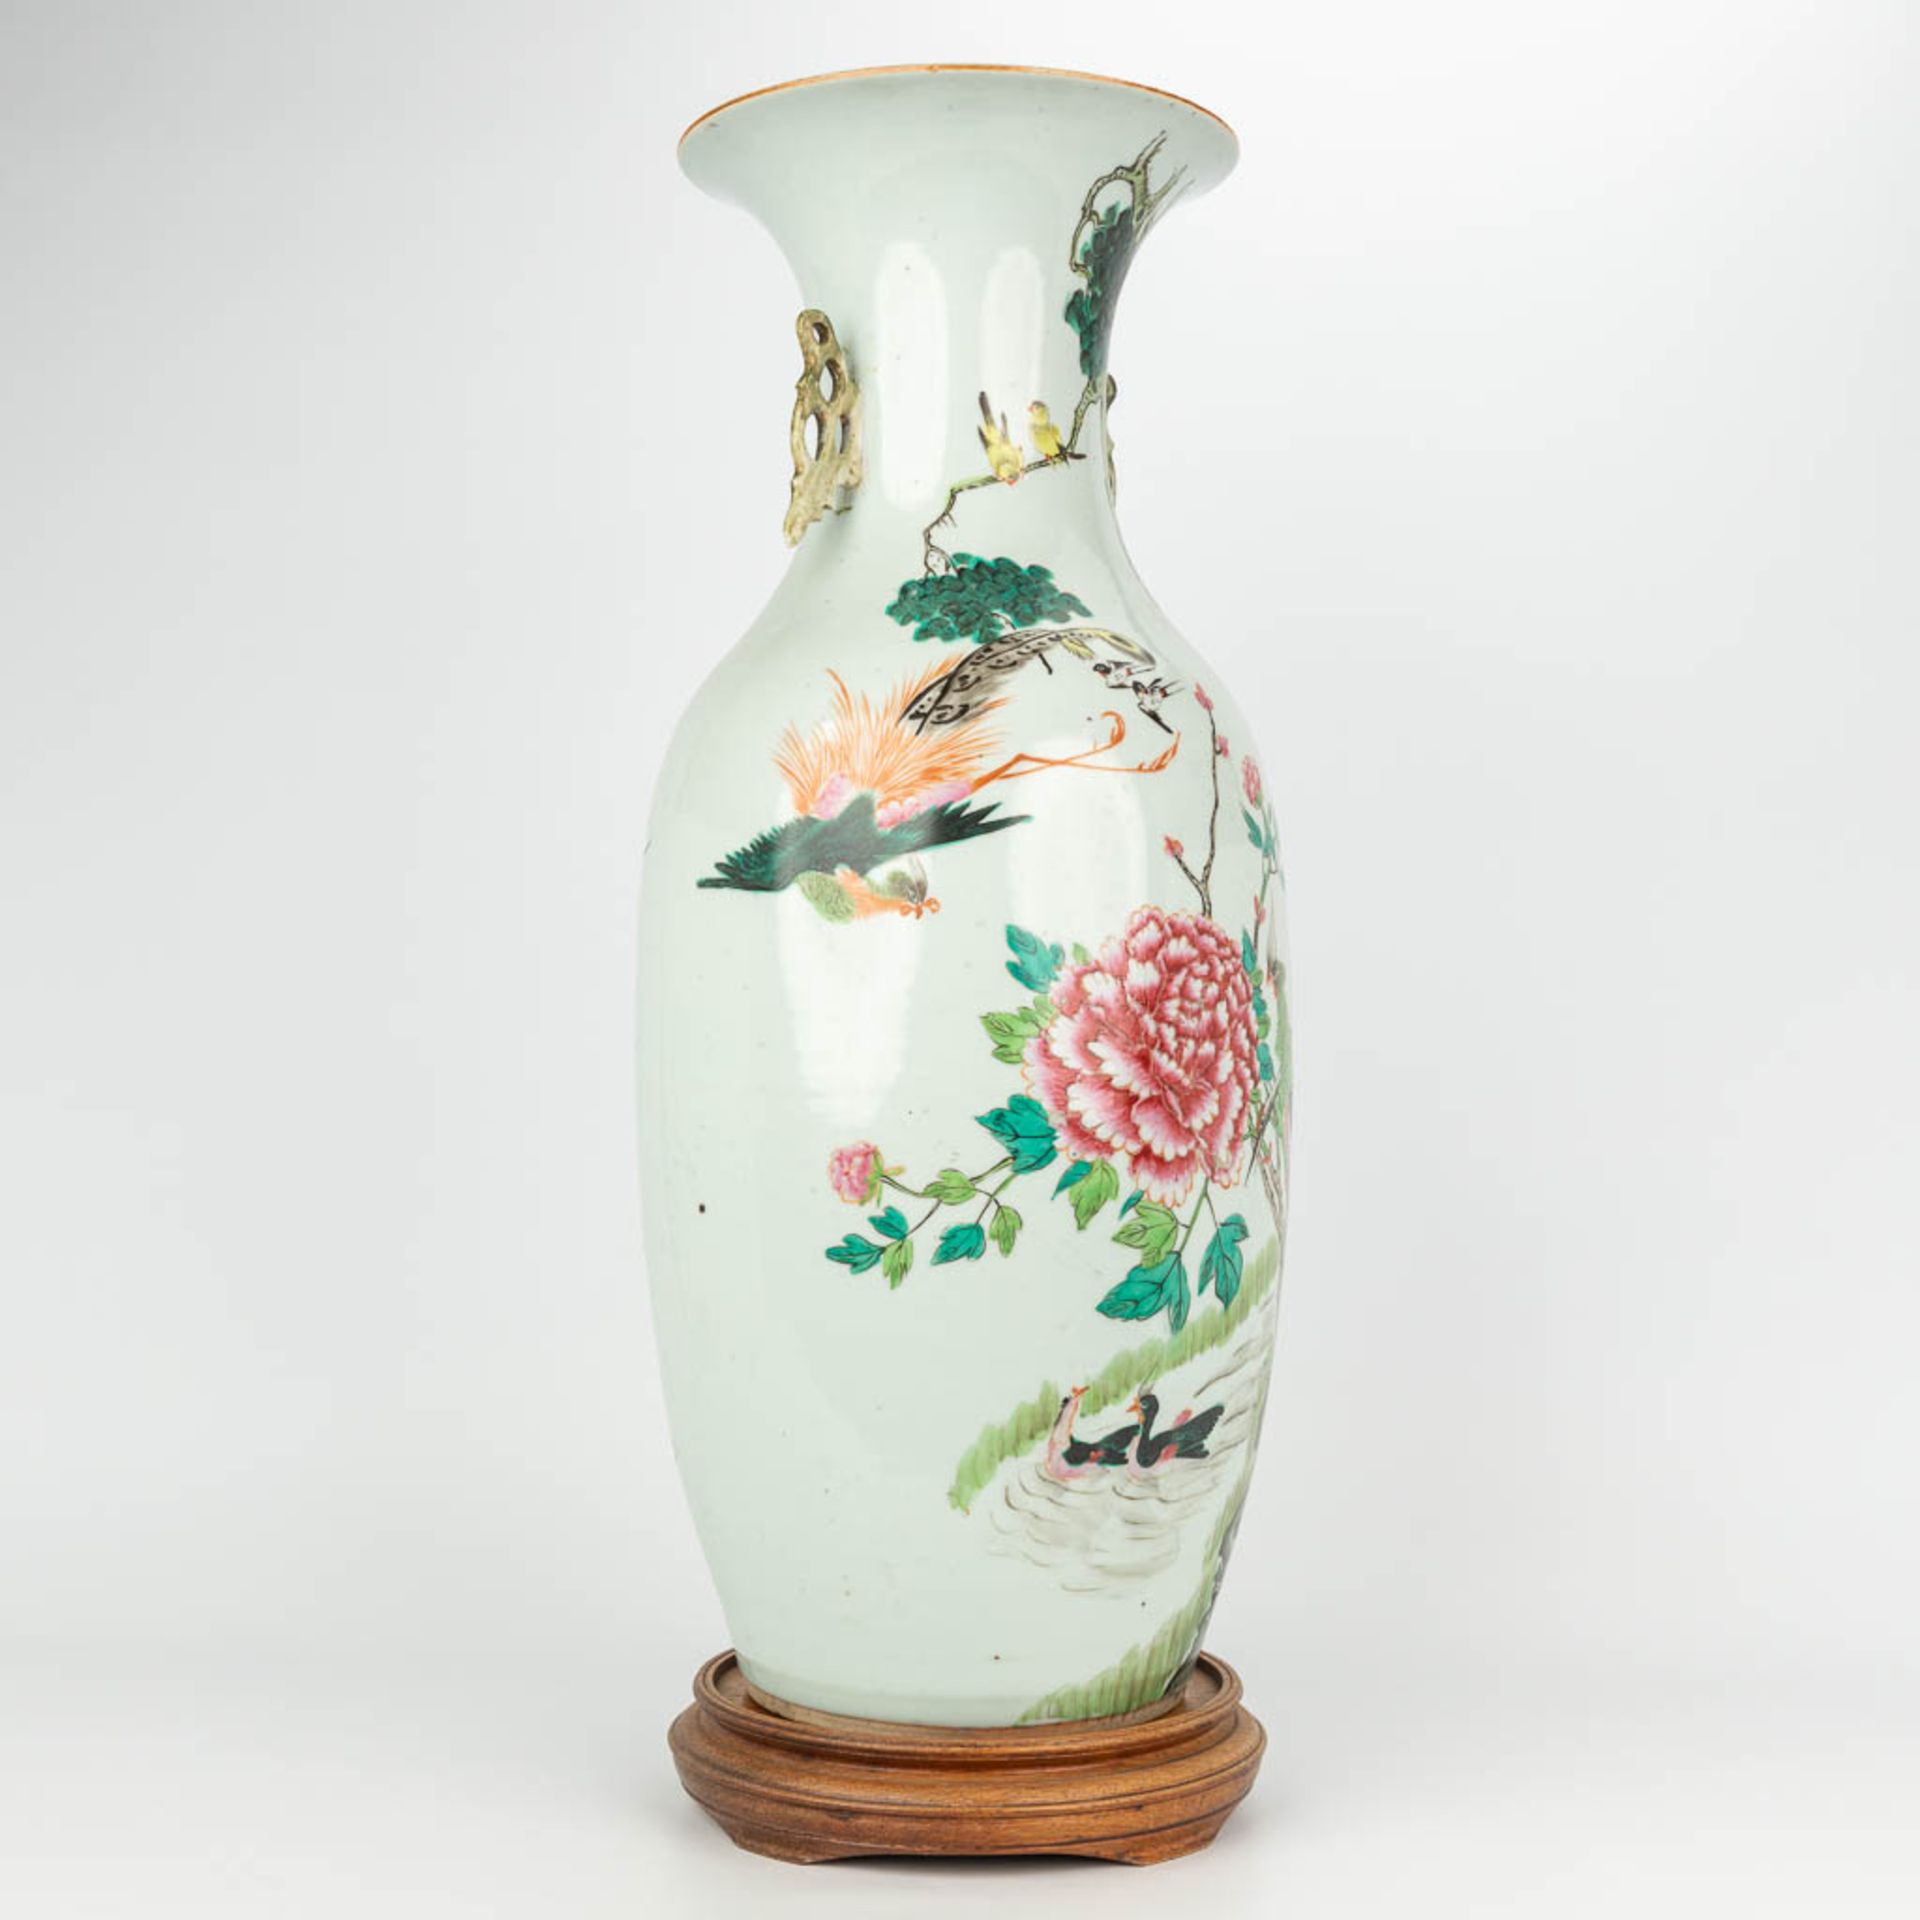 A Chinese vase made of porcelain, Famille rose and decorated with fauna and flora. (H:57cm) - Image 3 of 17